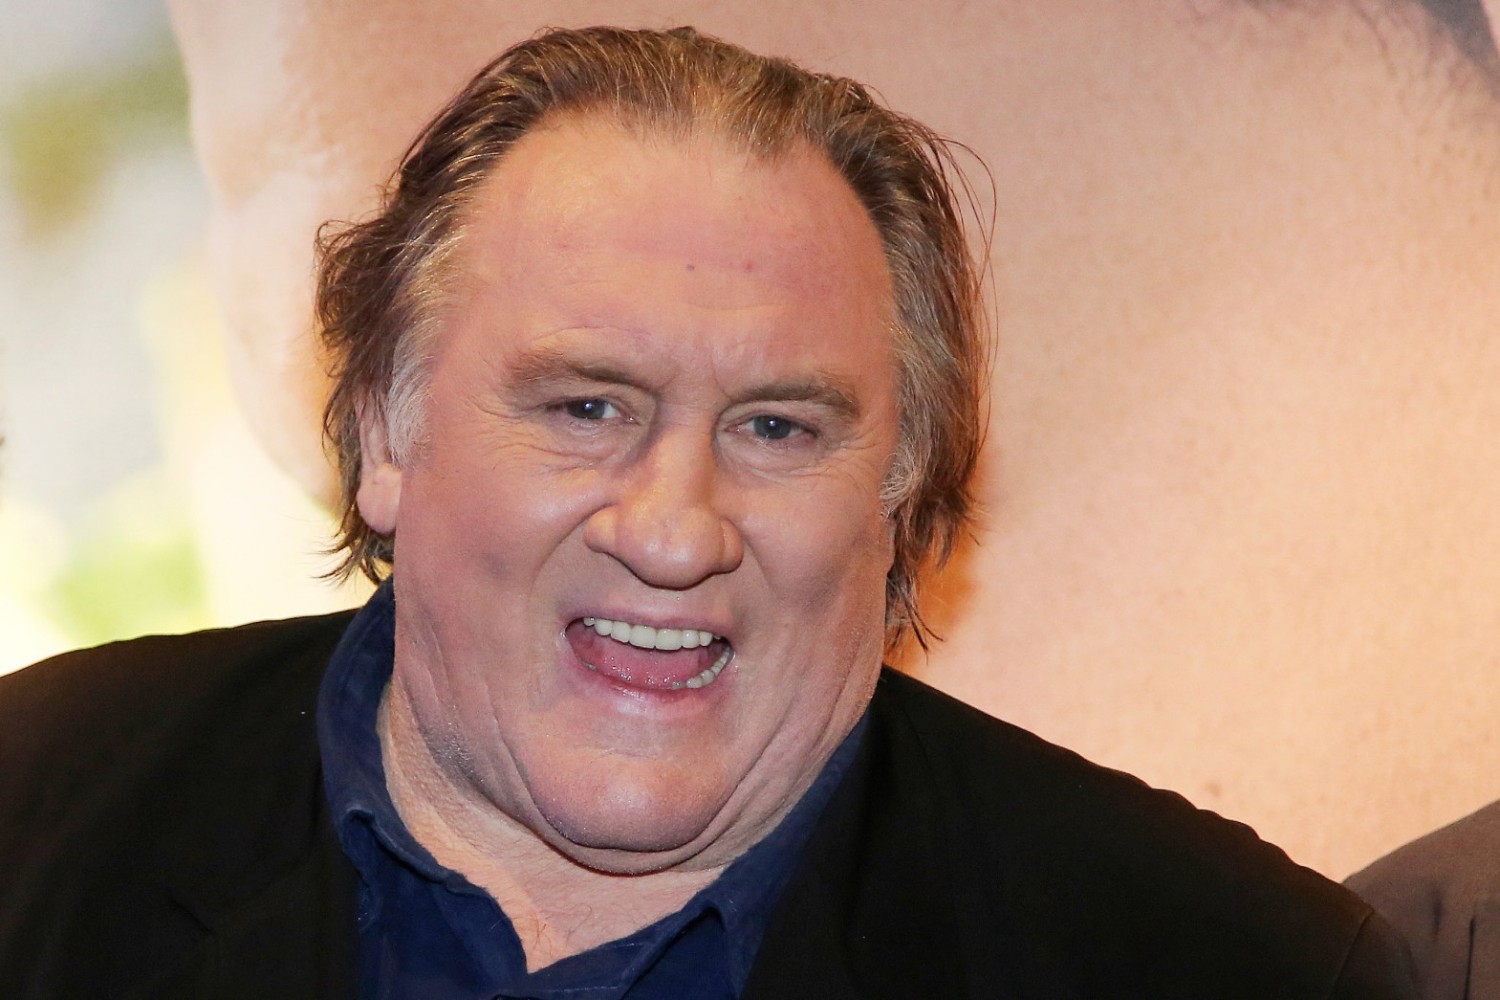 56 French stars, including former first lady, defend Gerard Depardieu amid sexual abuse allegations